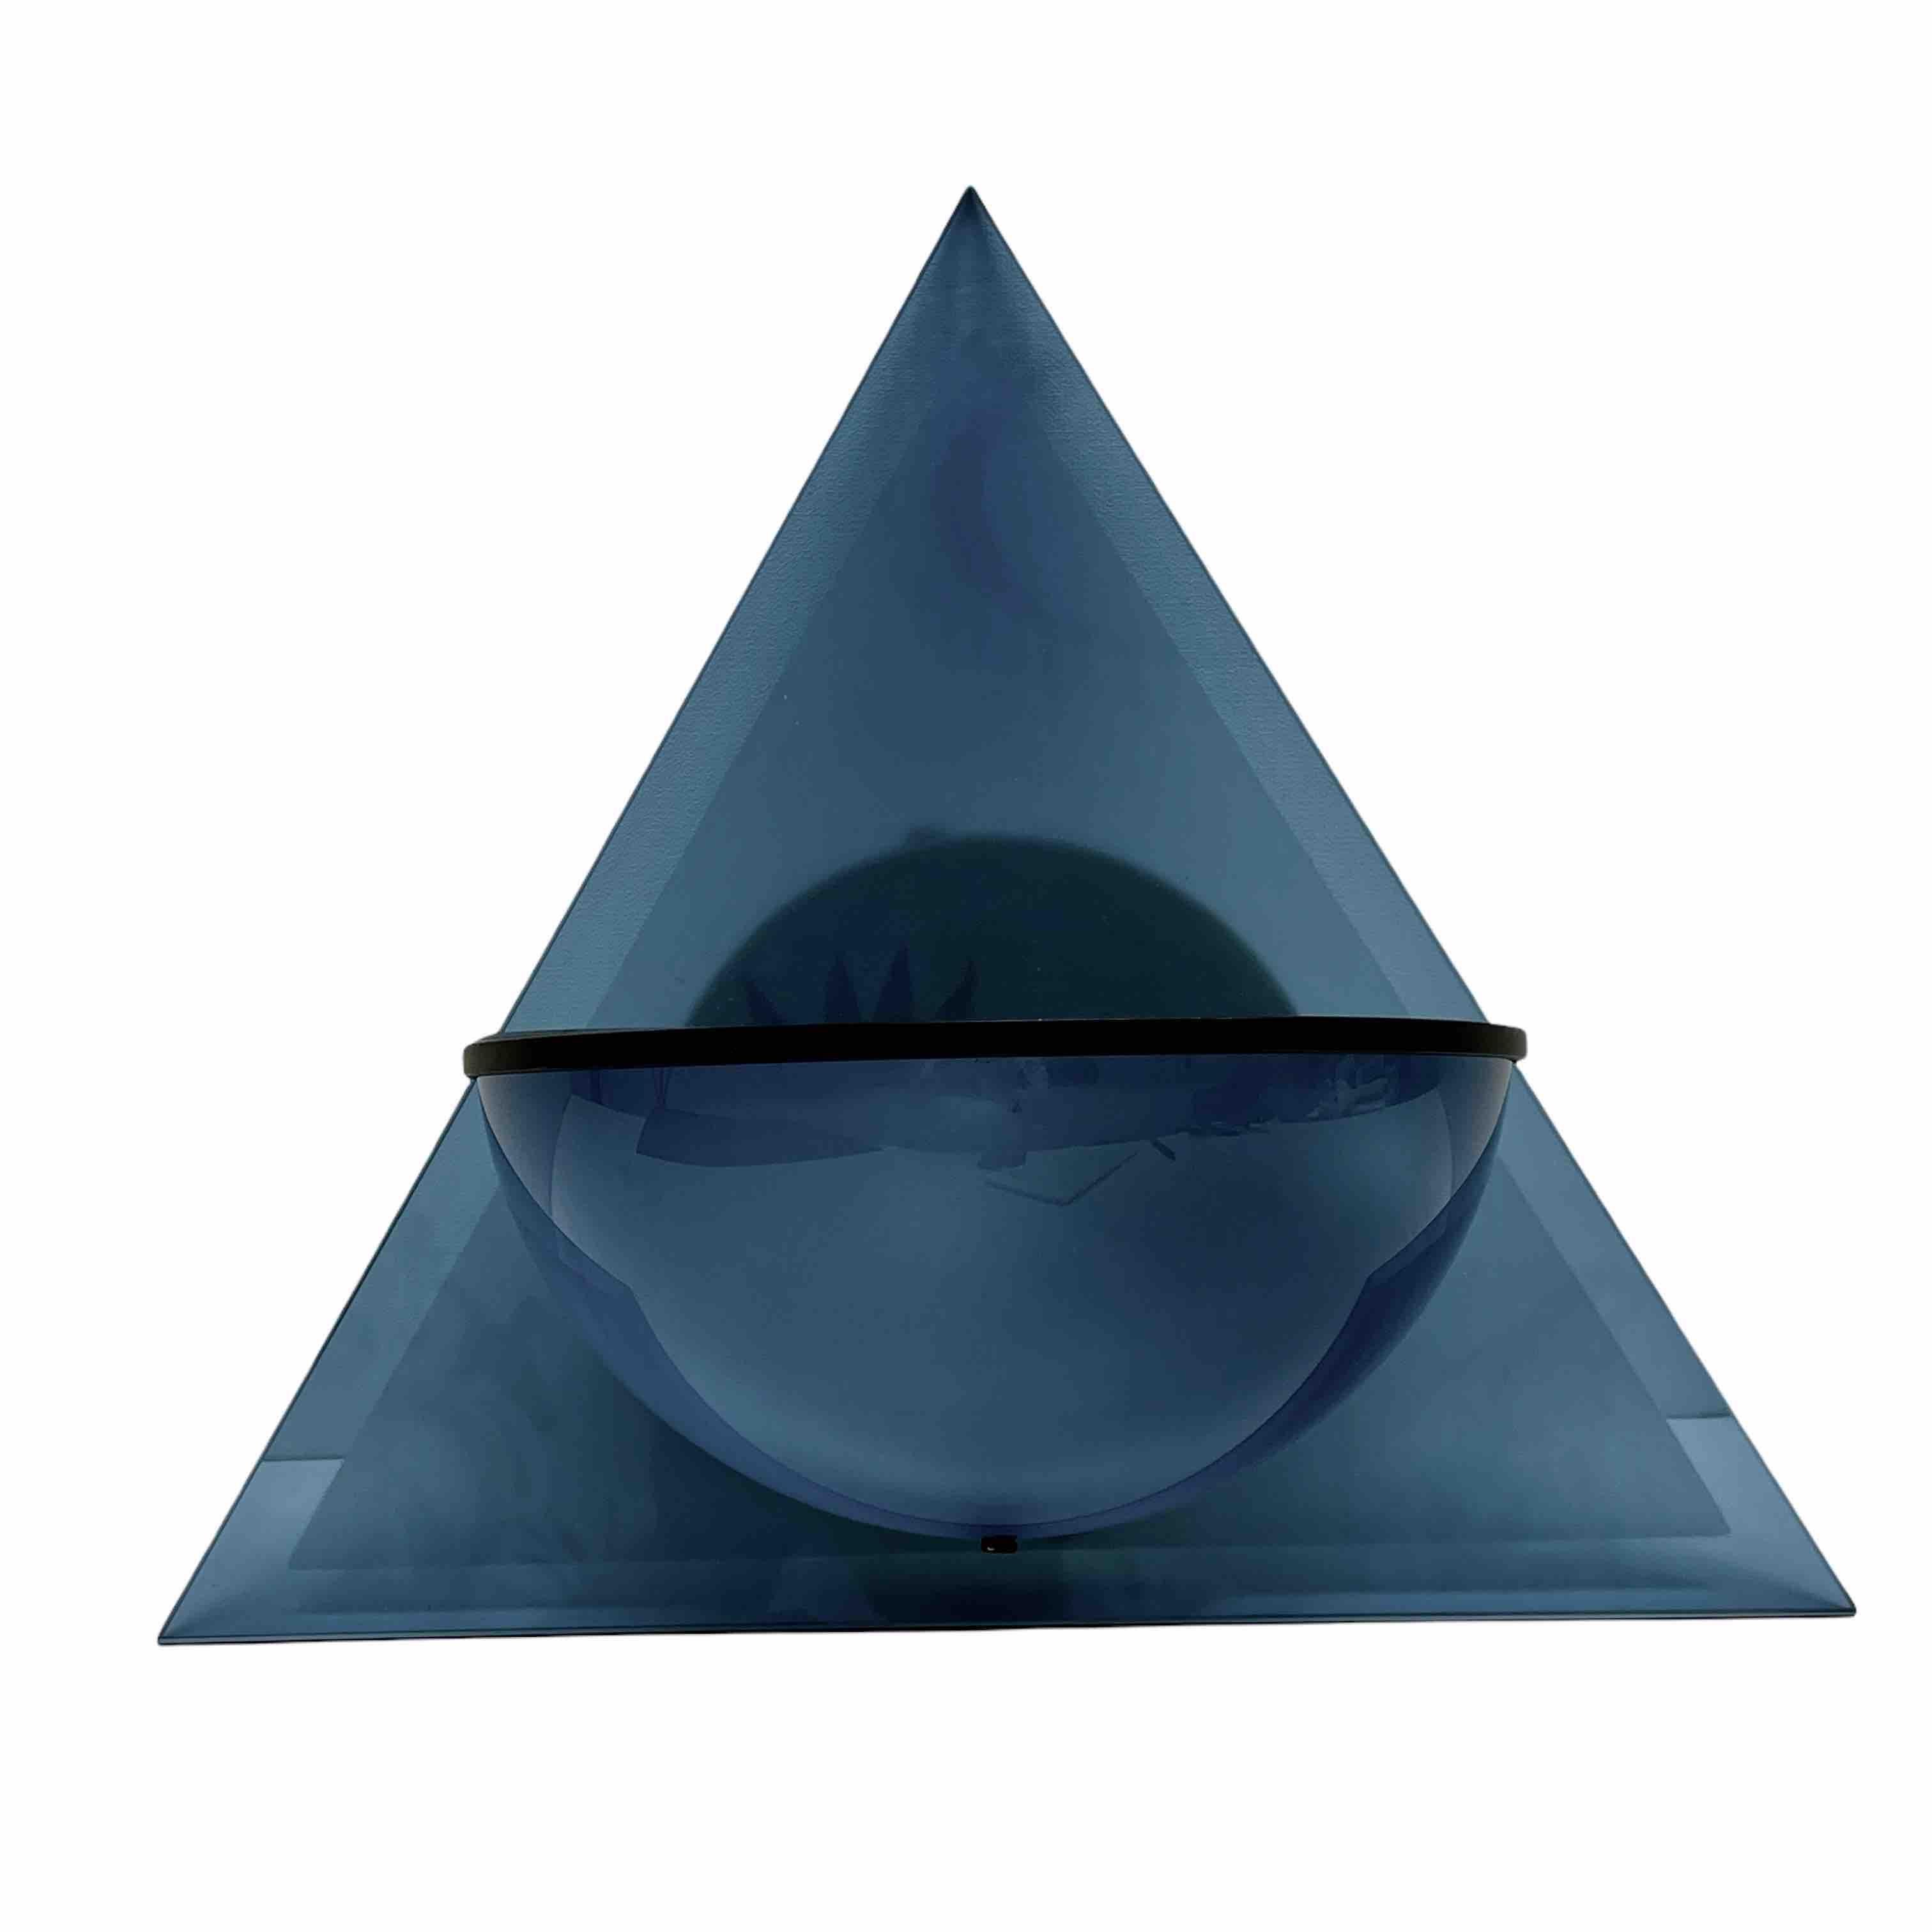 A beautiful sconce or wall lights by Lamperti, Italy. It is made of metal with a nice blue glass. The Fixture requires one European E14 / 110 Volt Light bulb, up to 150 watts. A nice statement piece on your wall.